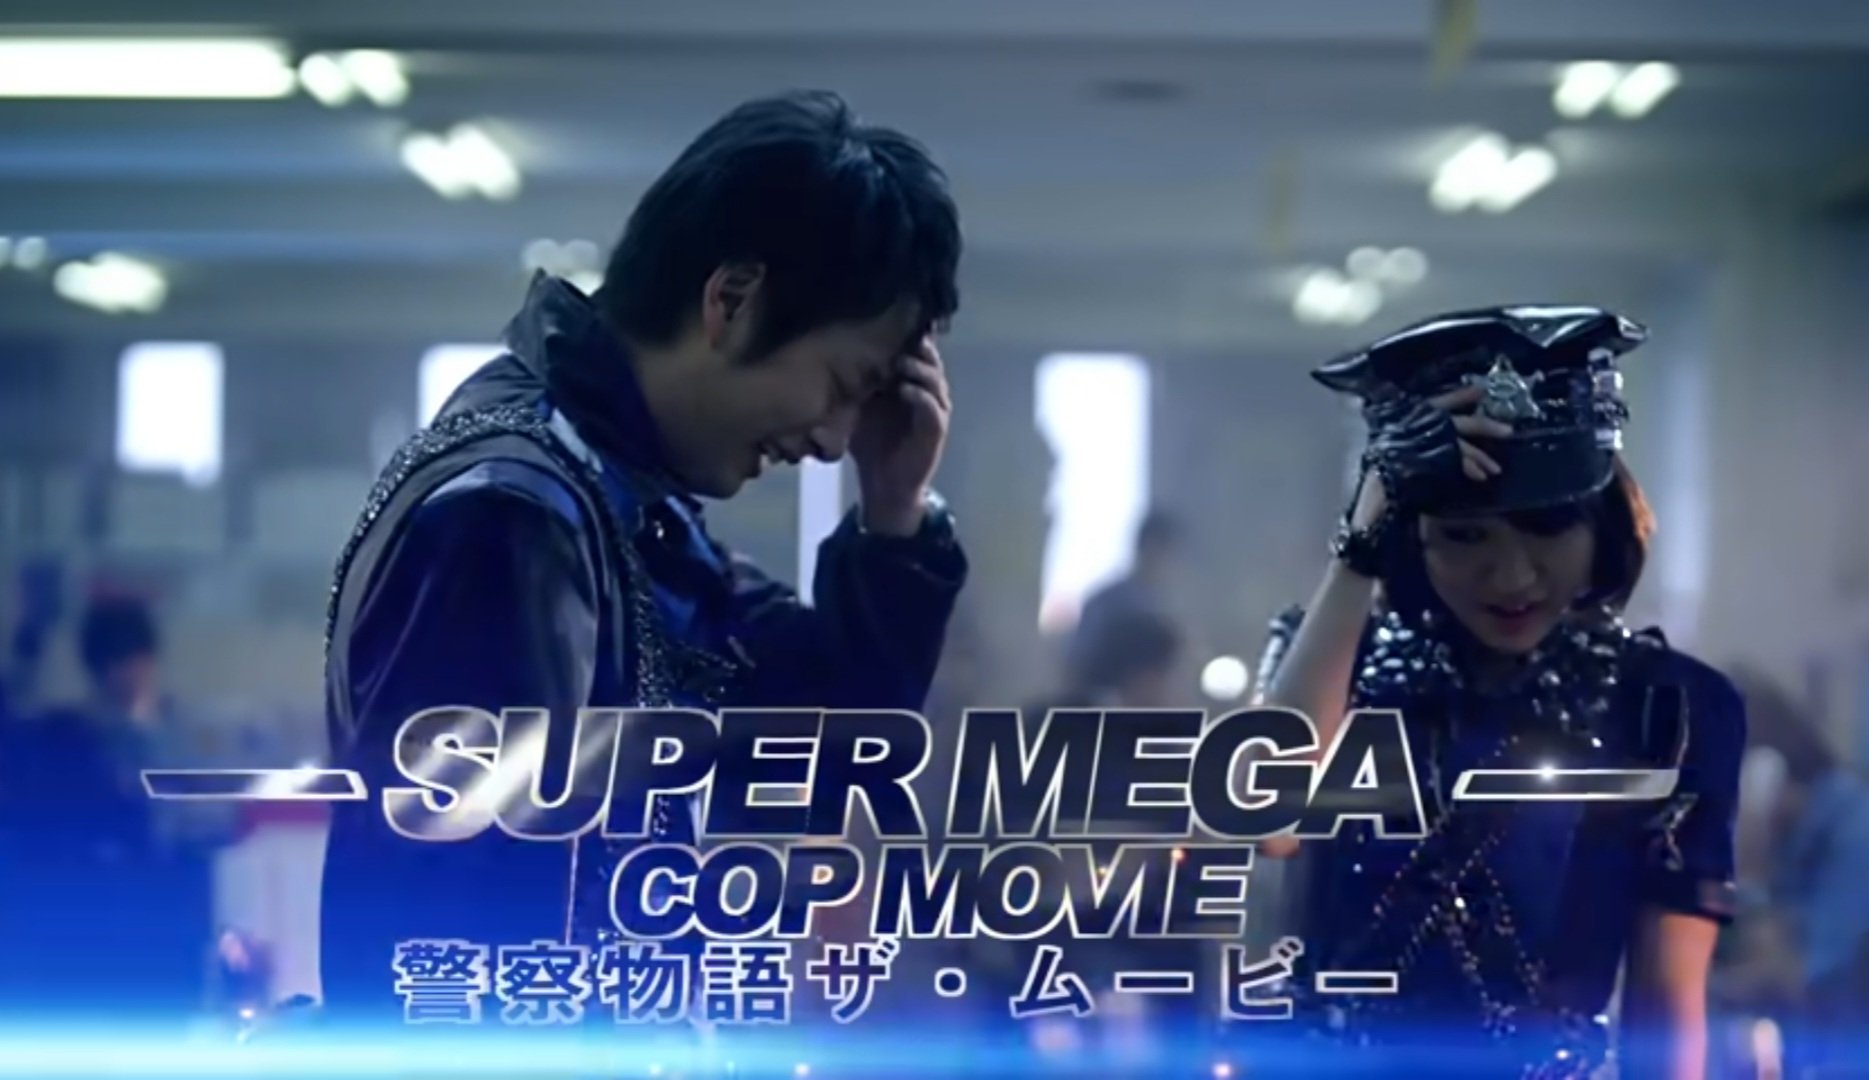 Joseph Kahn on X: I love my America-fetishized Japanese titles in this  music video. Police Commander John Steele. Super Mega Cop Movie. Names  you'd see in a Capcom video game.  /